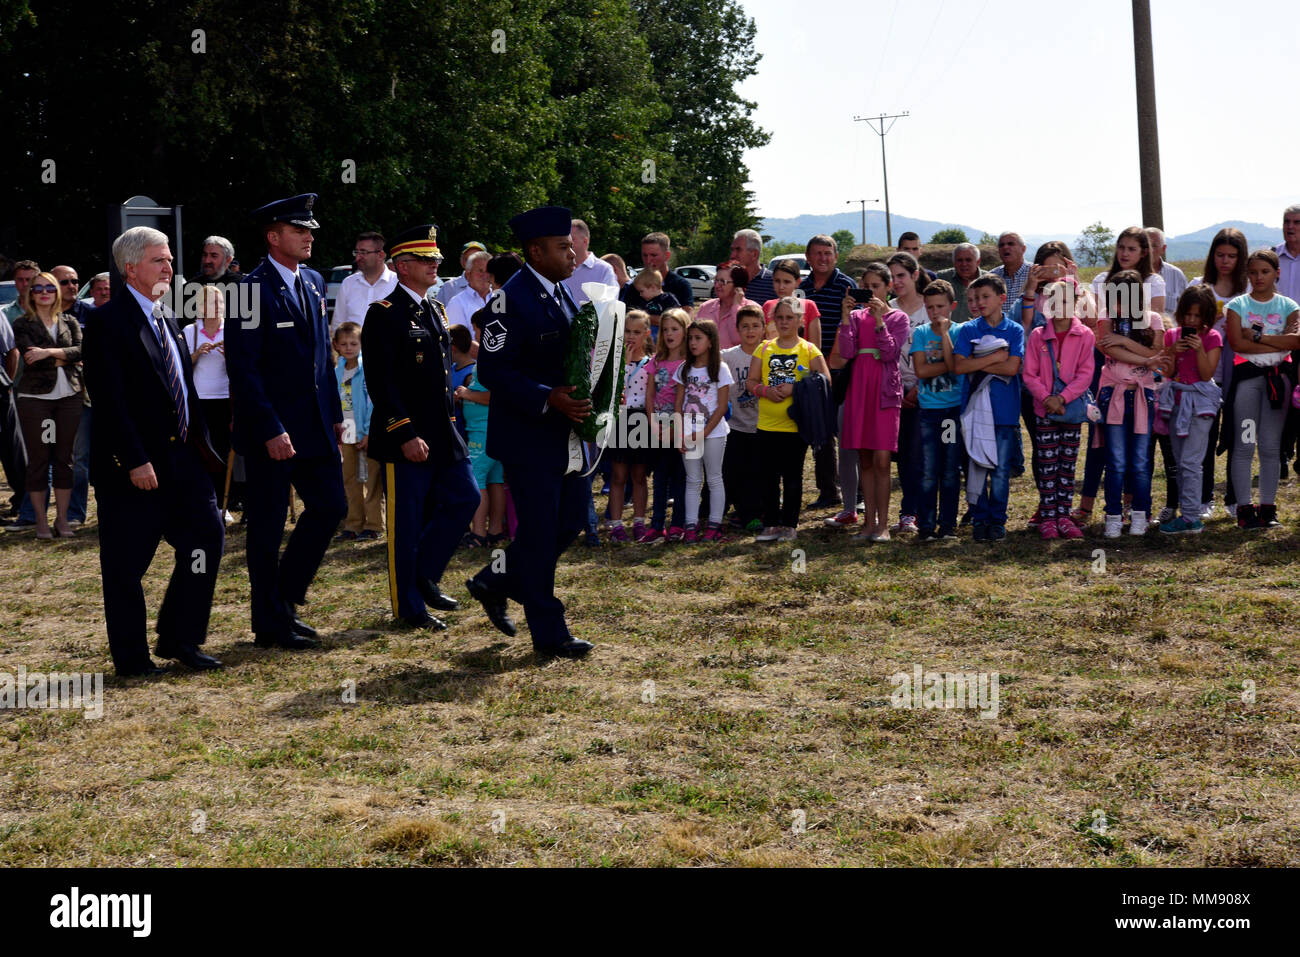 Distinguished visitors from the U.S. Embassy in Serbia and the Ohio Air National Guard present a wreath to commemorate the 73rd anniversary of Operation Halyard at Galobica Field in Pranjani, Serbia, Sept. 16, 2017. From August 1944 to February 1945, with the help of the local Serbian citizens and the former Yugoslav Armed Forces in the Homeland, more than 500 airmen were transported from improvised runways in Serbia to U.S. airbases in Italy. (U.S. Air Force photo by Staff Sgt. Rachelle Coleman) Stock Photo